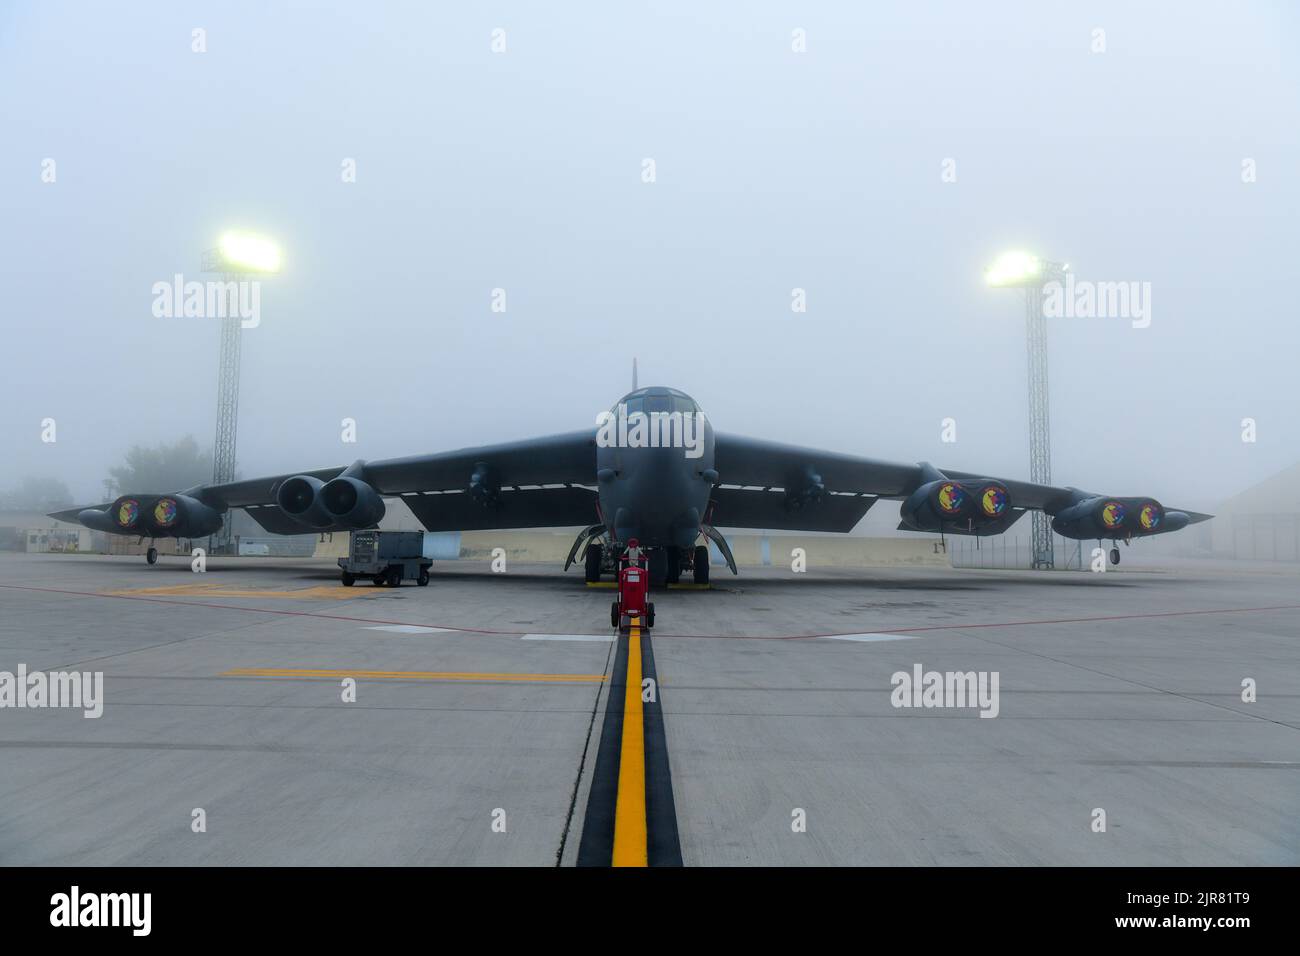 A B-52H Stratofortress sit parked in the fog on the flight line at Minot Air Force Base, North Dakota, Aug. 16, 2022. The B-52 bomber is capable of flying at high subsonic speeds at altitudes up to 50,000 feet. (U.S. Air Force photo by Airman Alysa Knott) Stock Photo